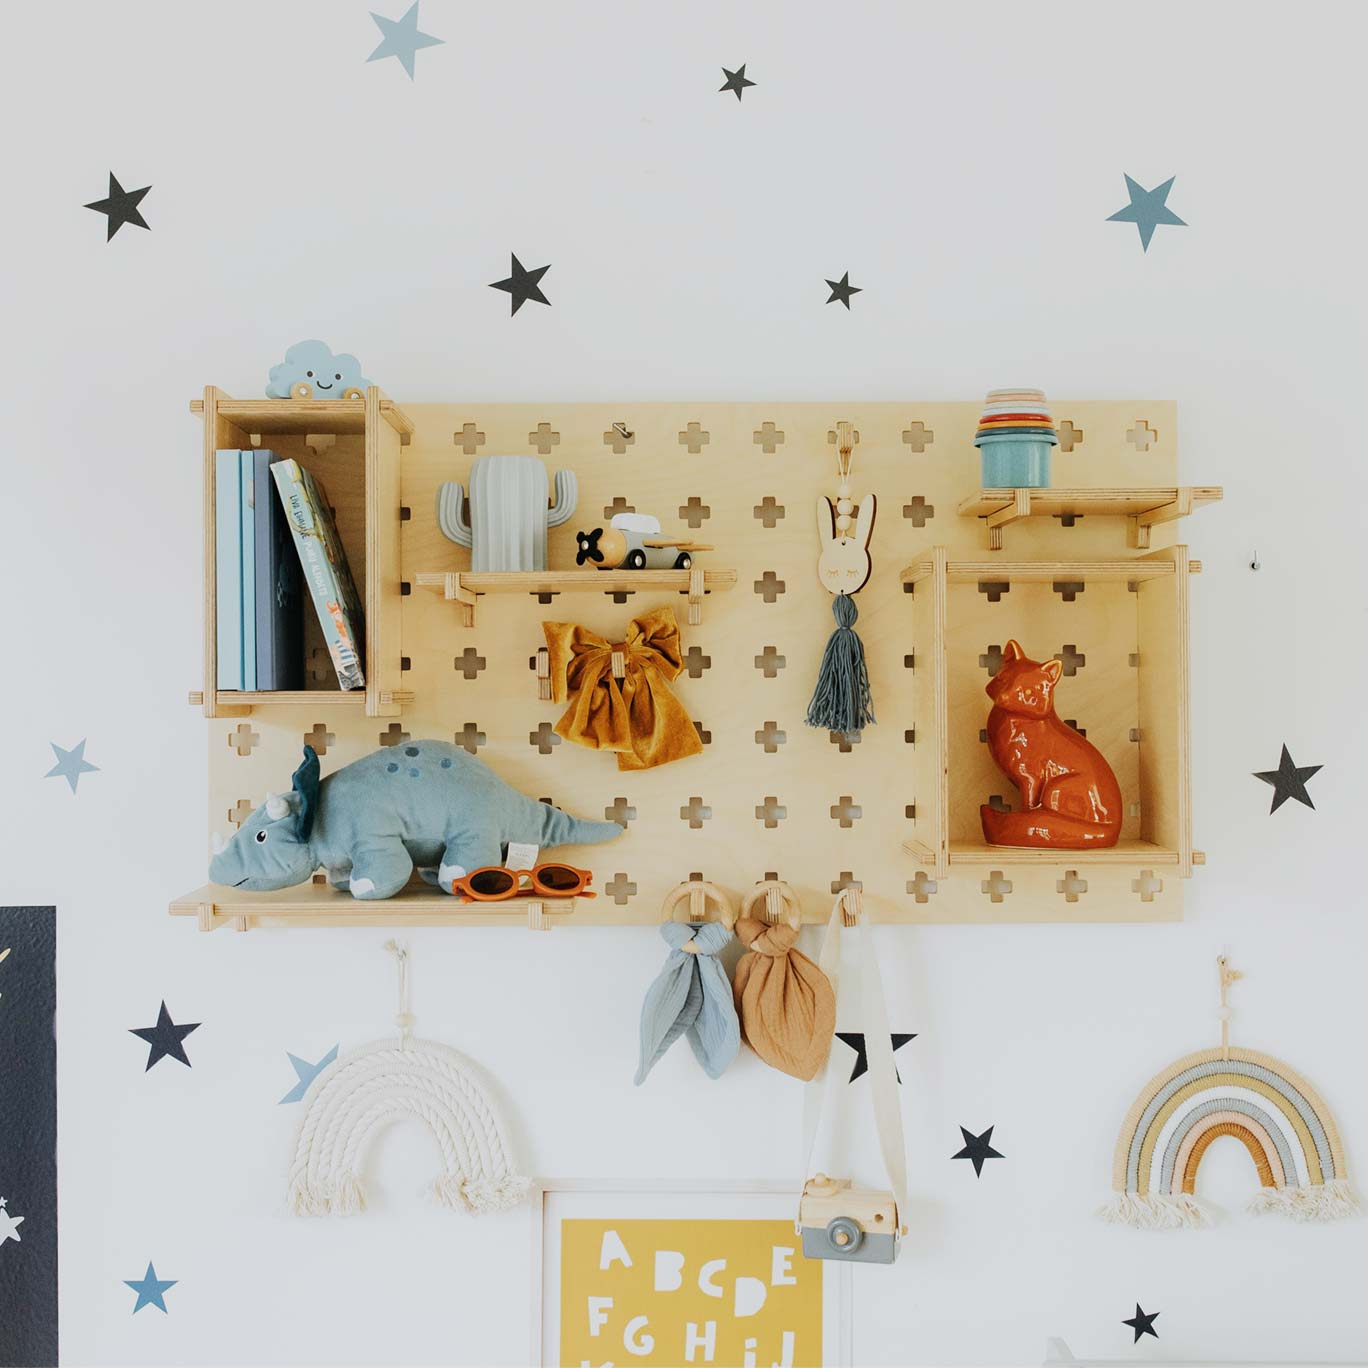 A child's room with stars on the wall.